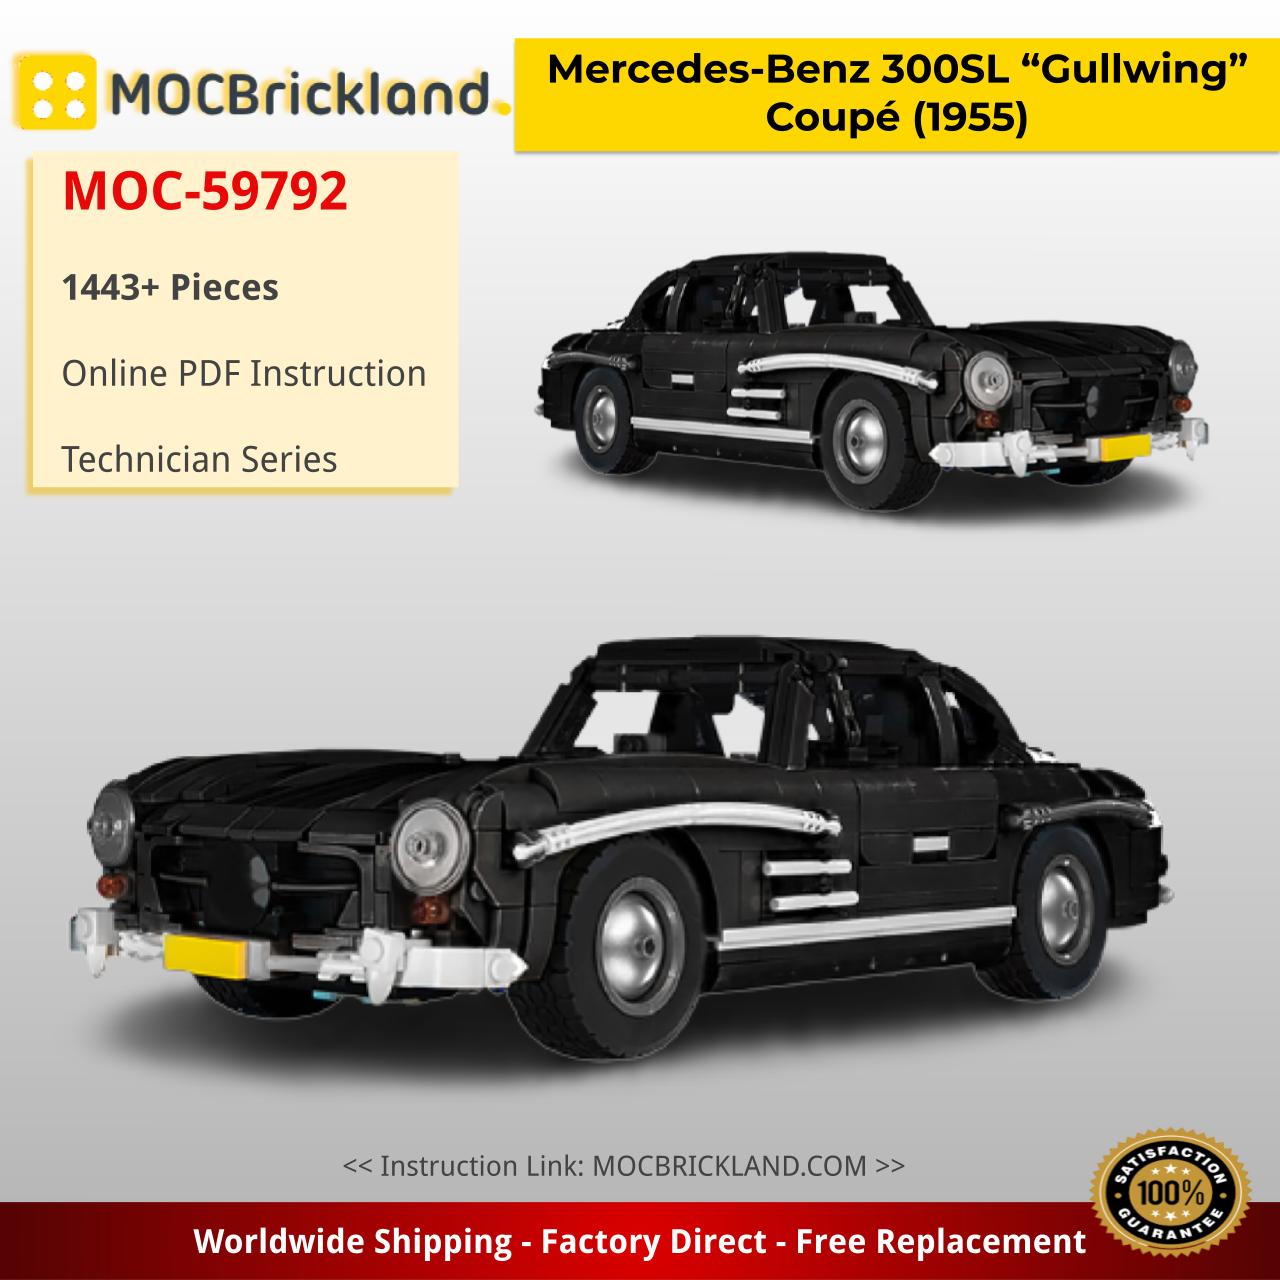 technic moc 59792 mercedes benz 300sl gullwing coup 1955 by tmunz mocbrickland 4089